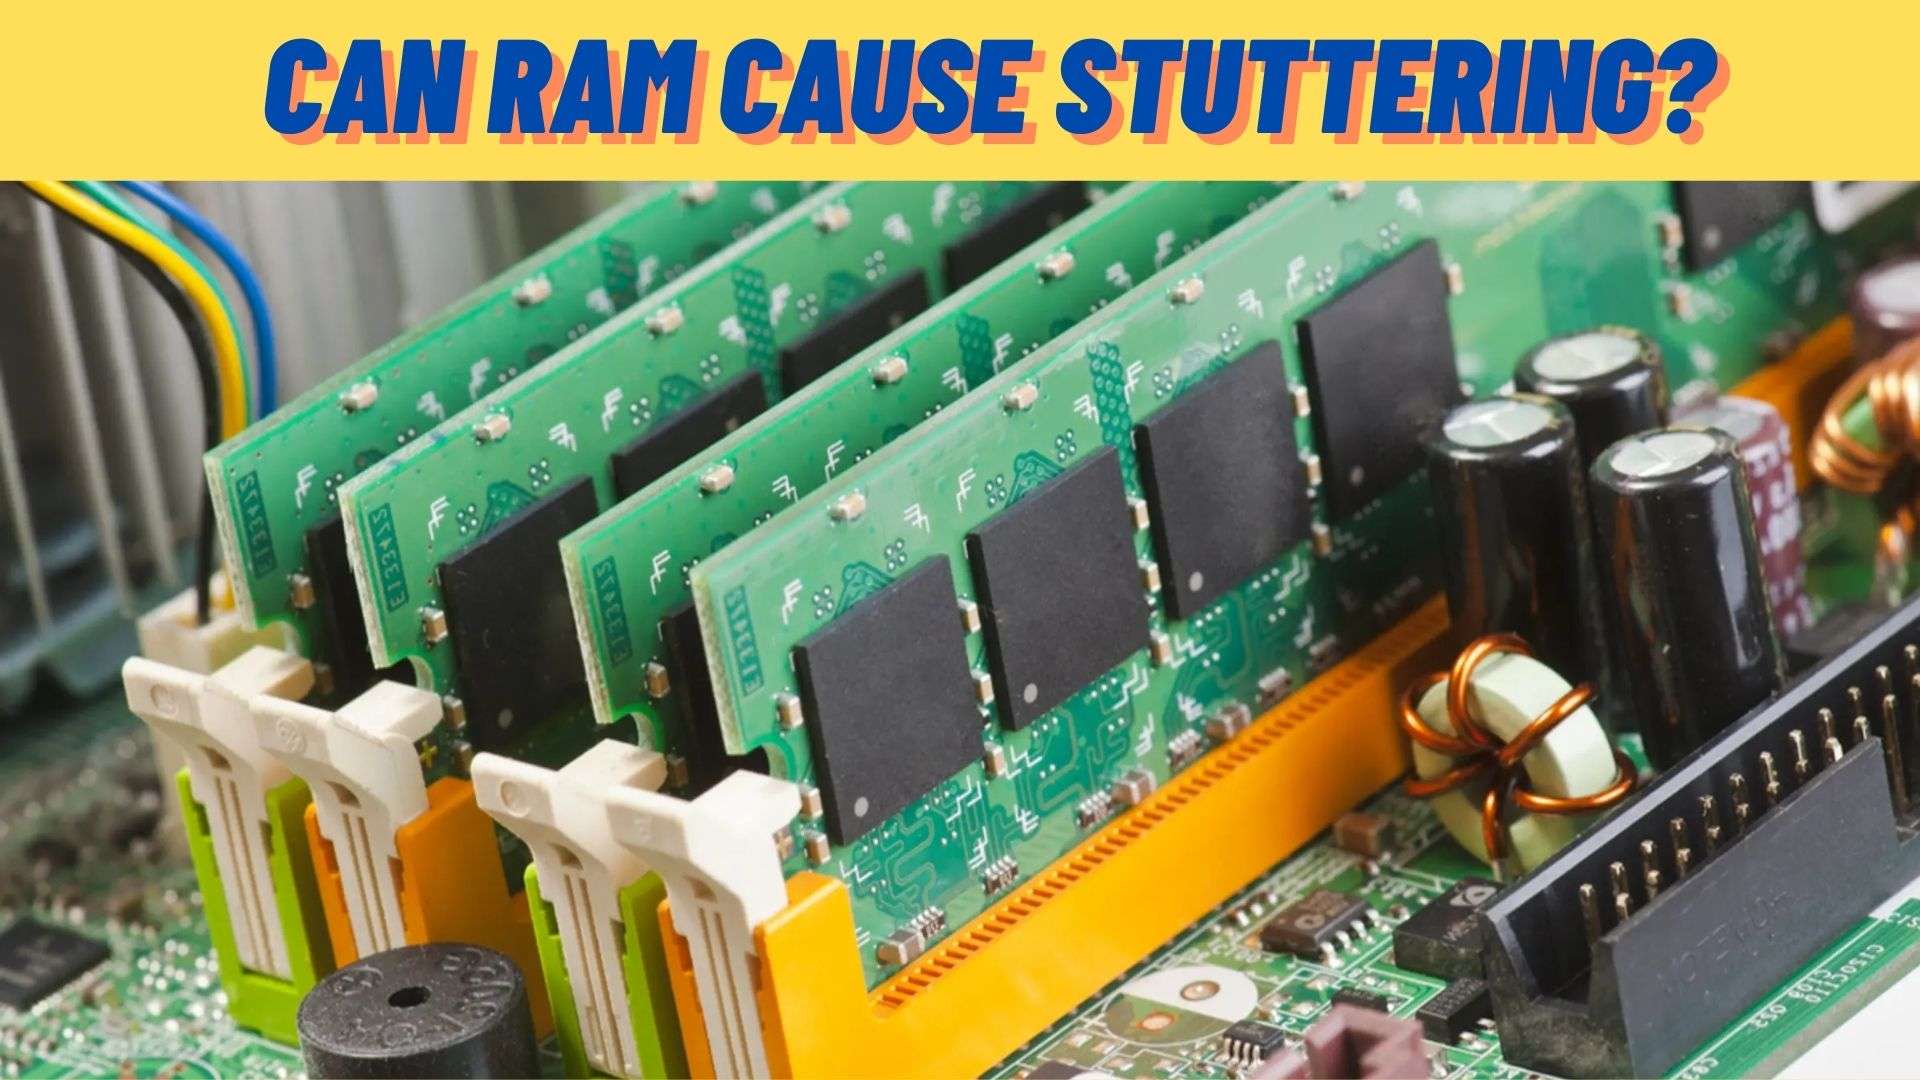 Can ram cause stuttering?